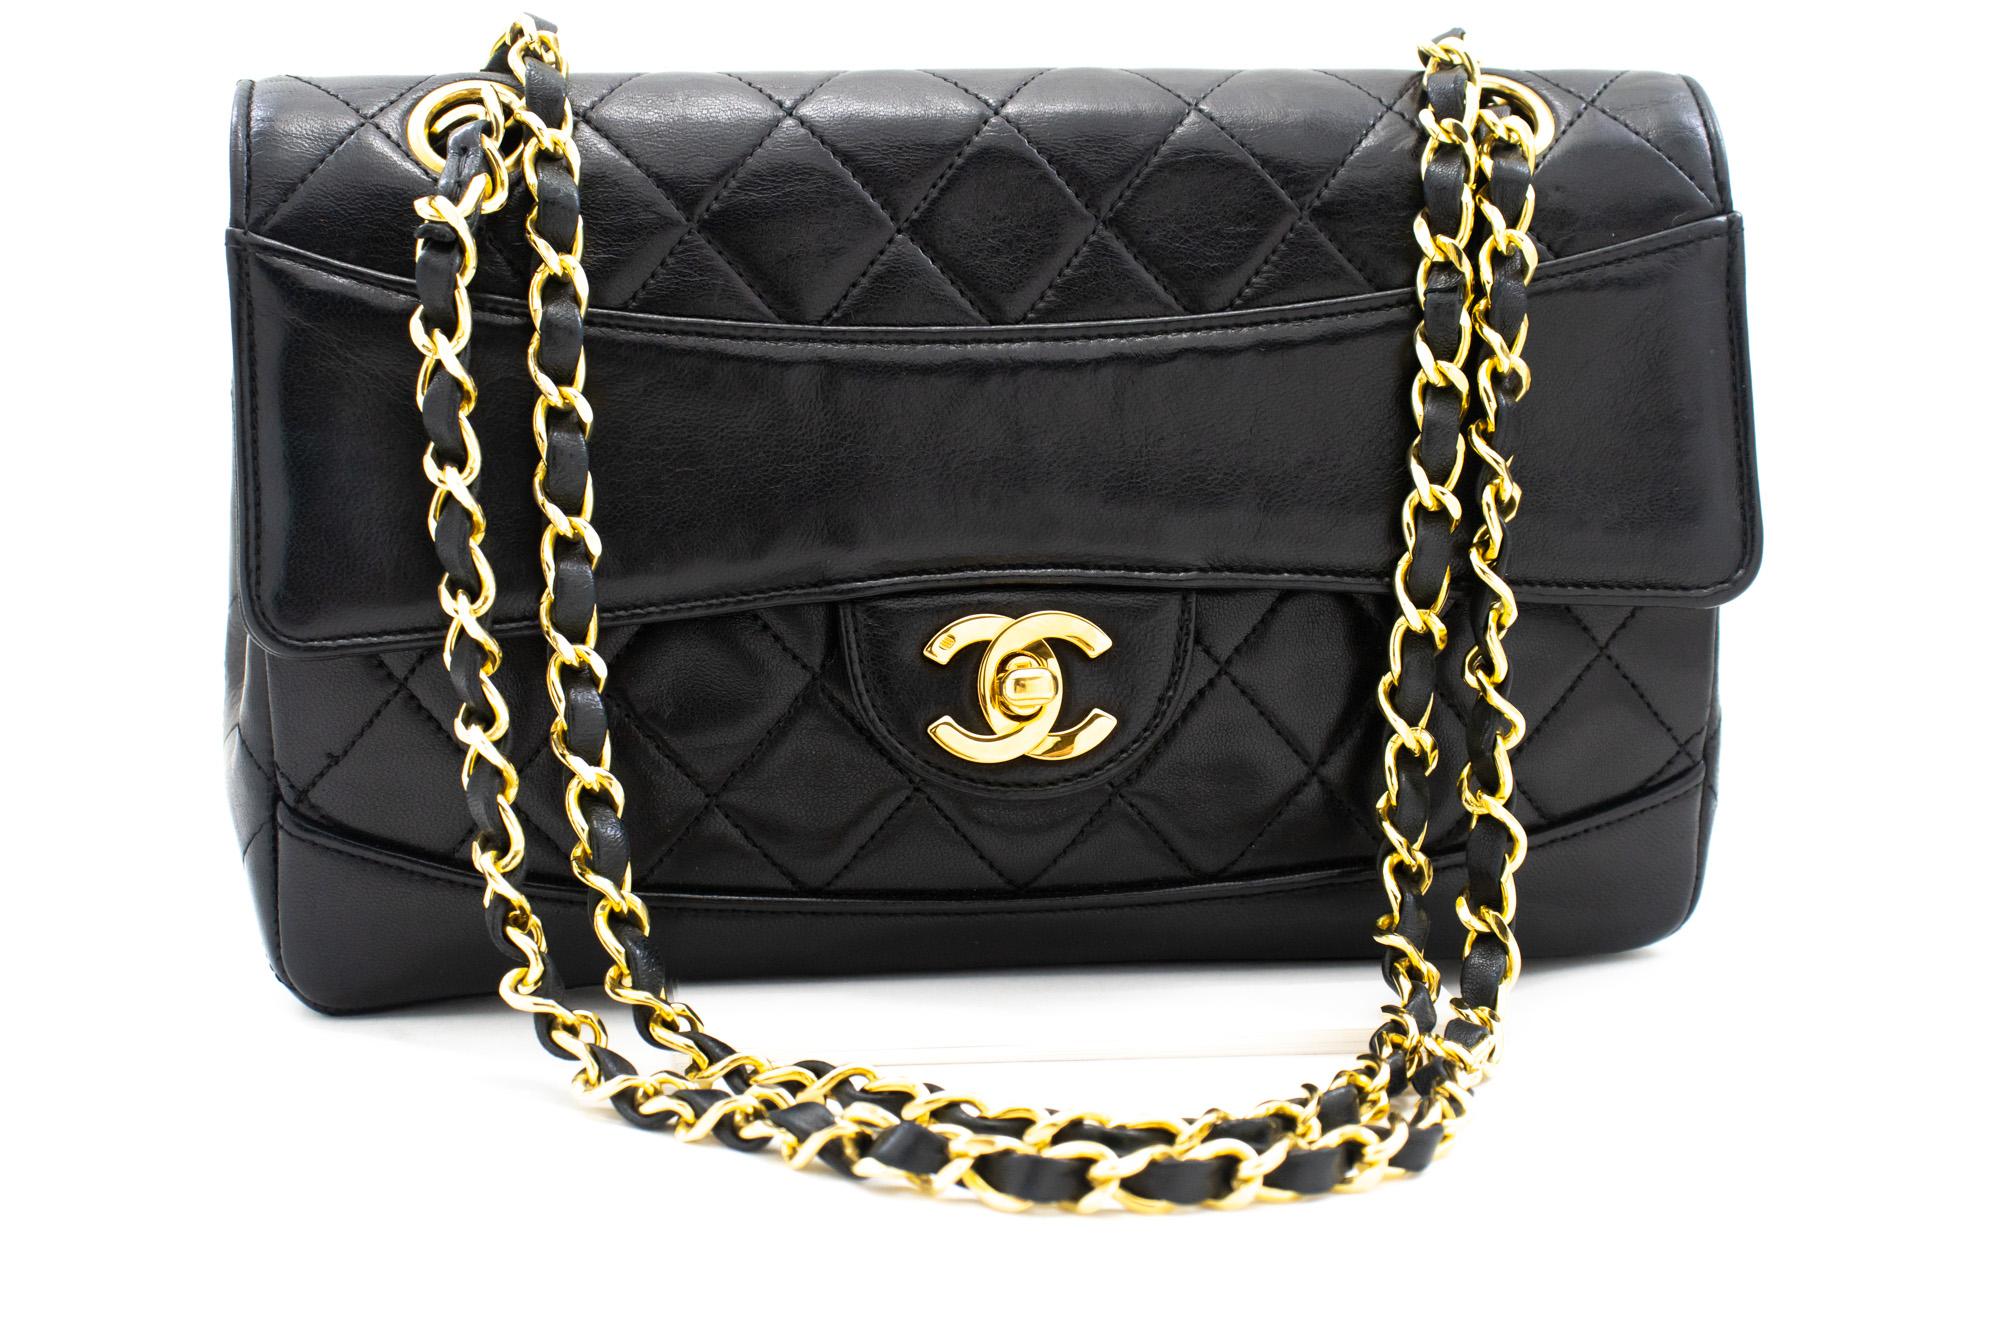 An authentic CHANEL Vintage Classic Chain Shoulder Bag Flap Quilted made of black Lambskin. The color is Black. The outside material is Leather. The pattern is Solid. This item is Vintage / Classic. The year of manufacture would be